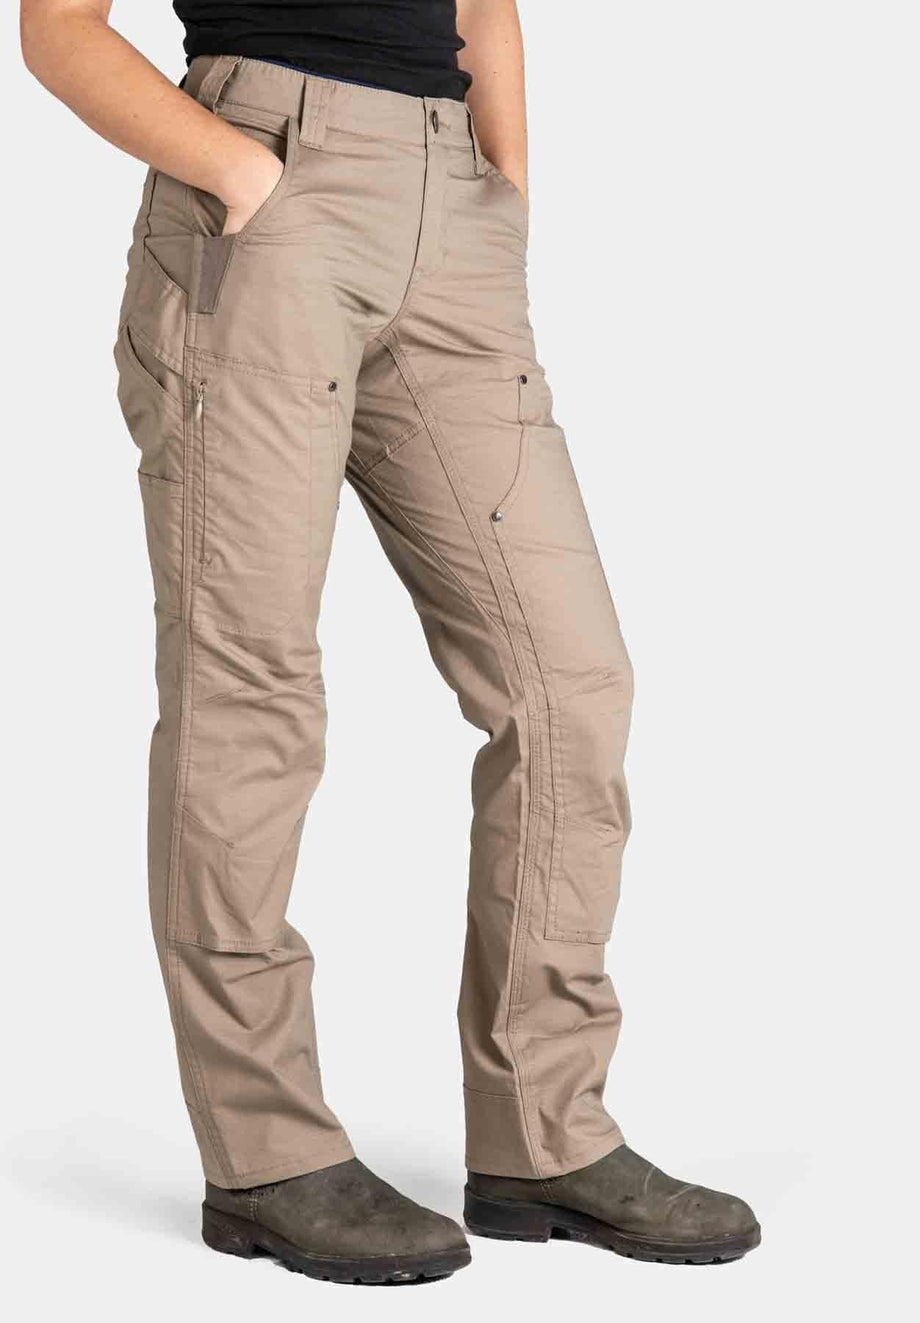 Work Craft Mid-Weight Reflective Cargo Pants | WP3065 - Alice Clothing